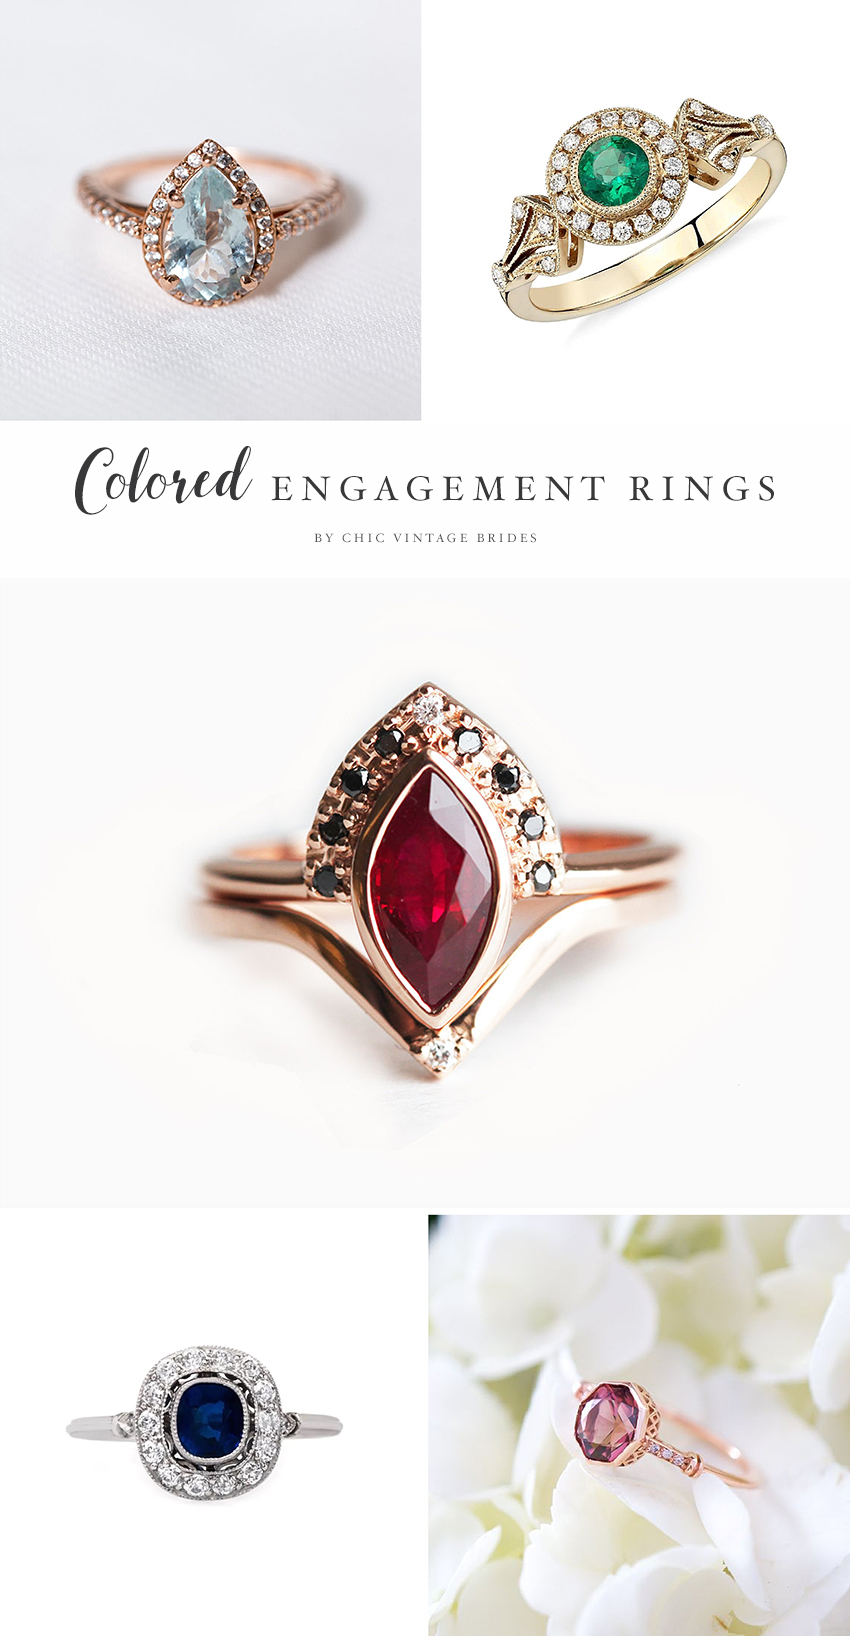 Exquisite Colored Stone Engagement Rings